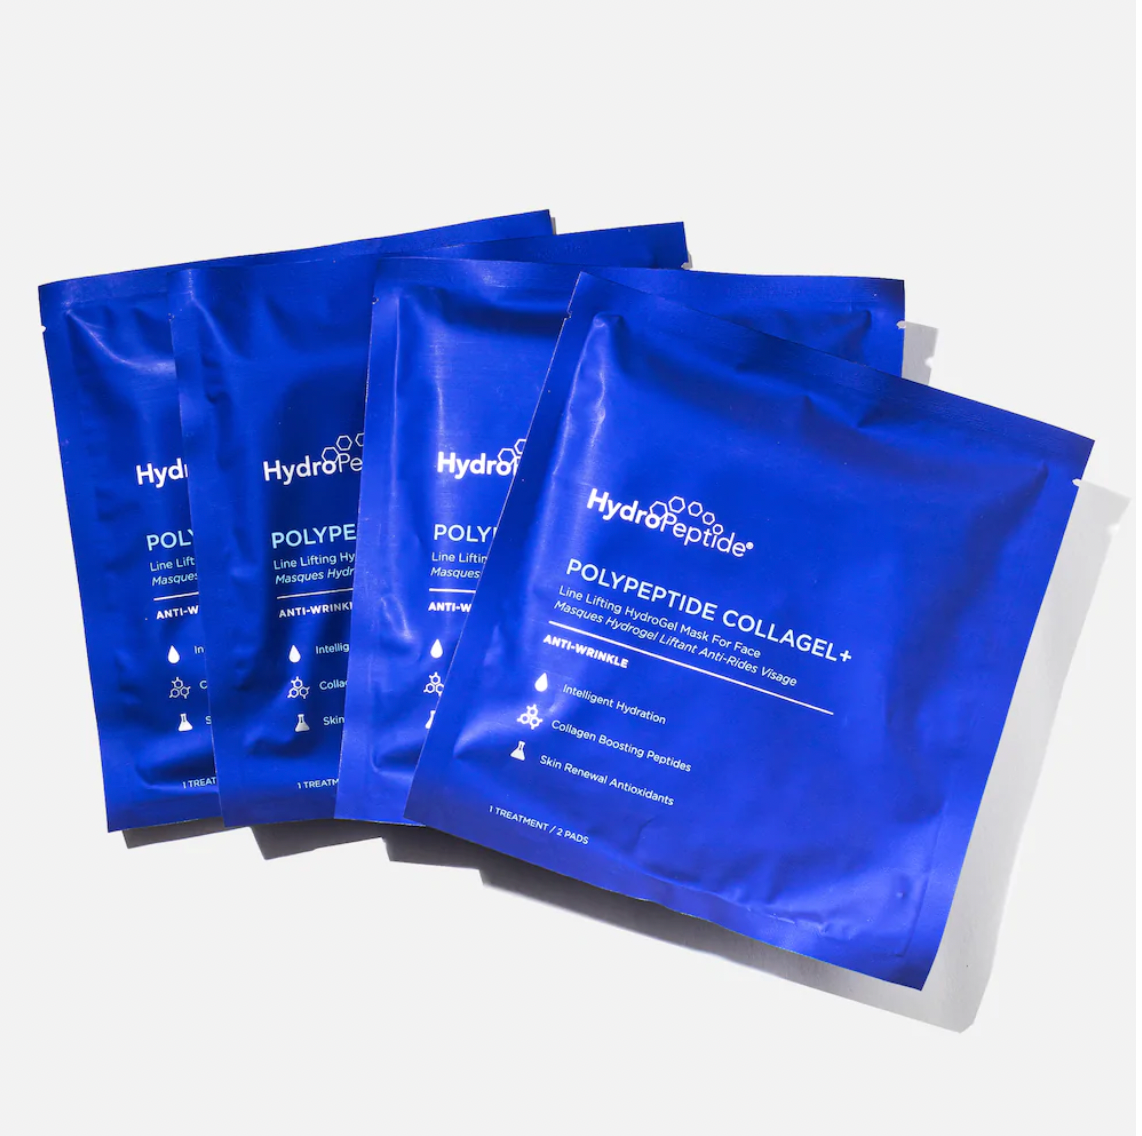 Polypeptide Collagen Mask for Face